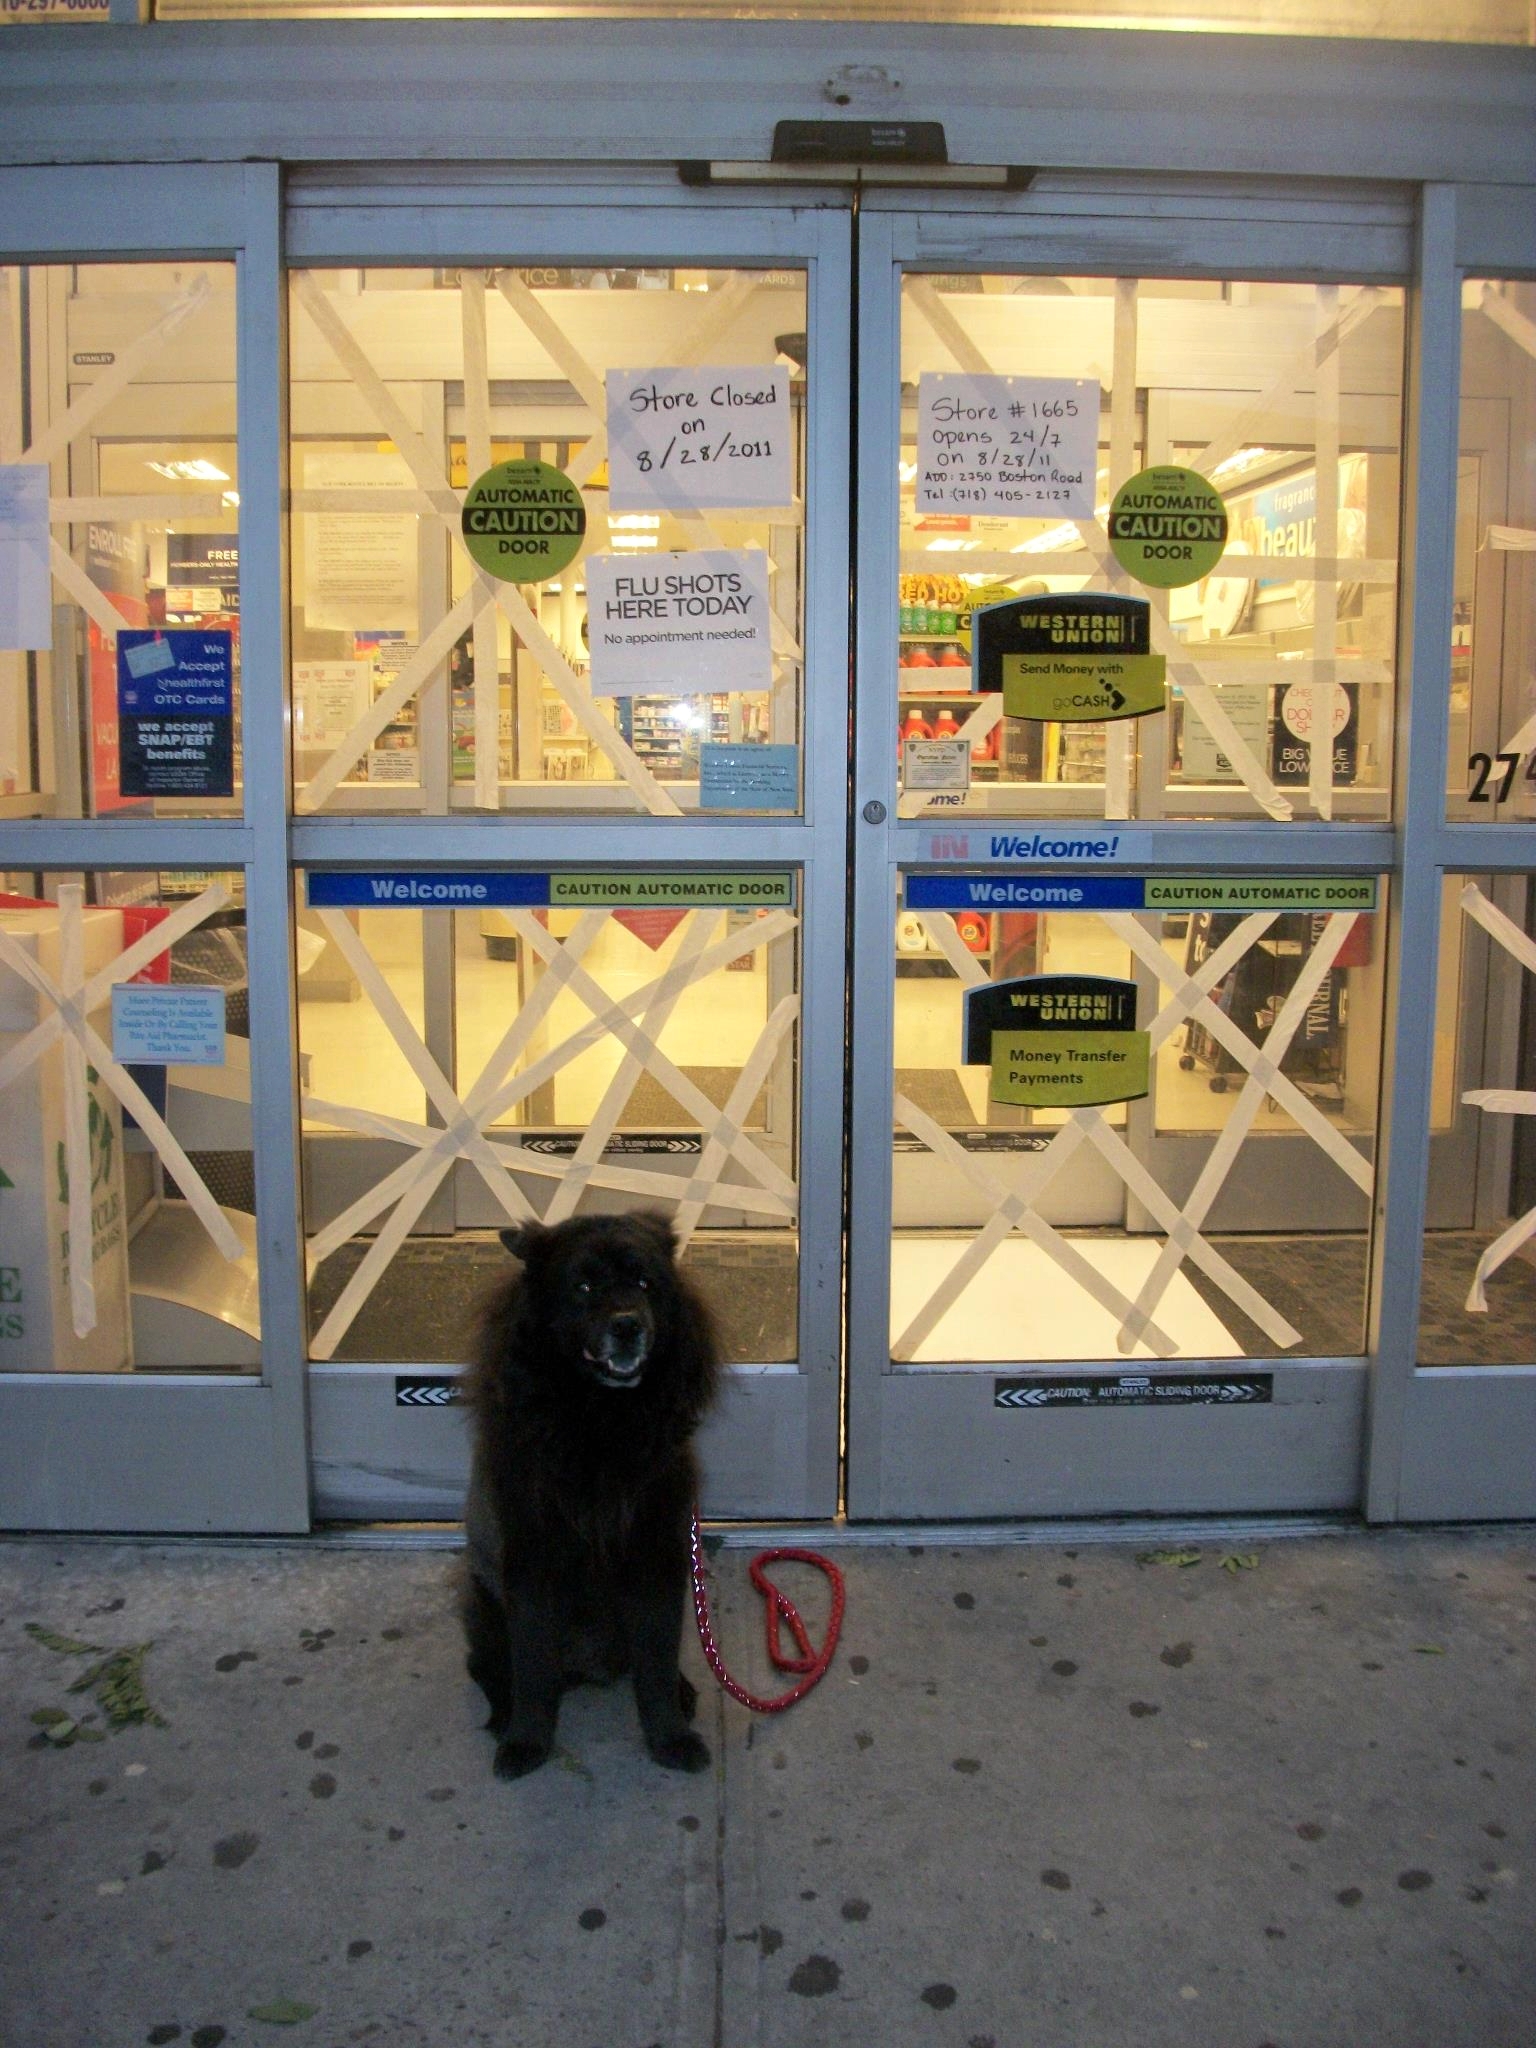 my-beautiful-dog-cookie-in-front-of-rite-aid-bronx-ny-credit-facebook-fan-pic-by-rosa-margarita.jpg 